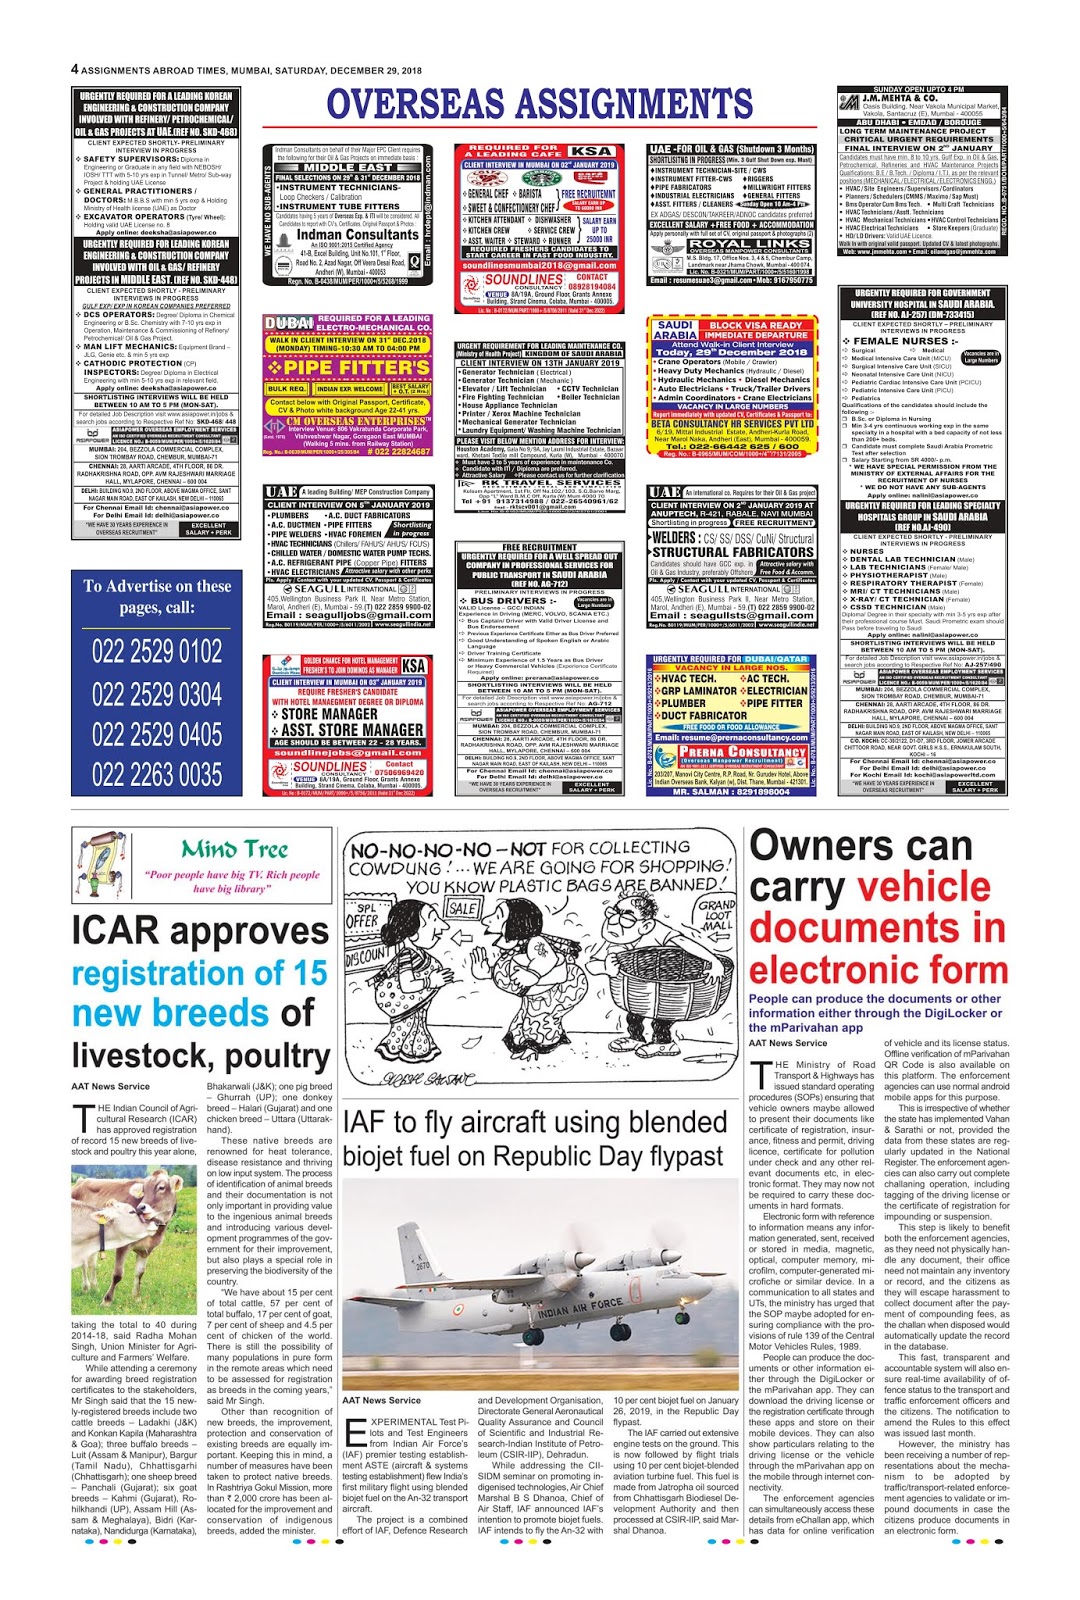 assignment abroad times epaper wednesday